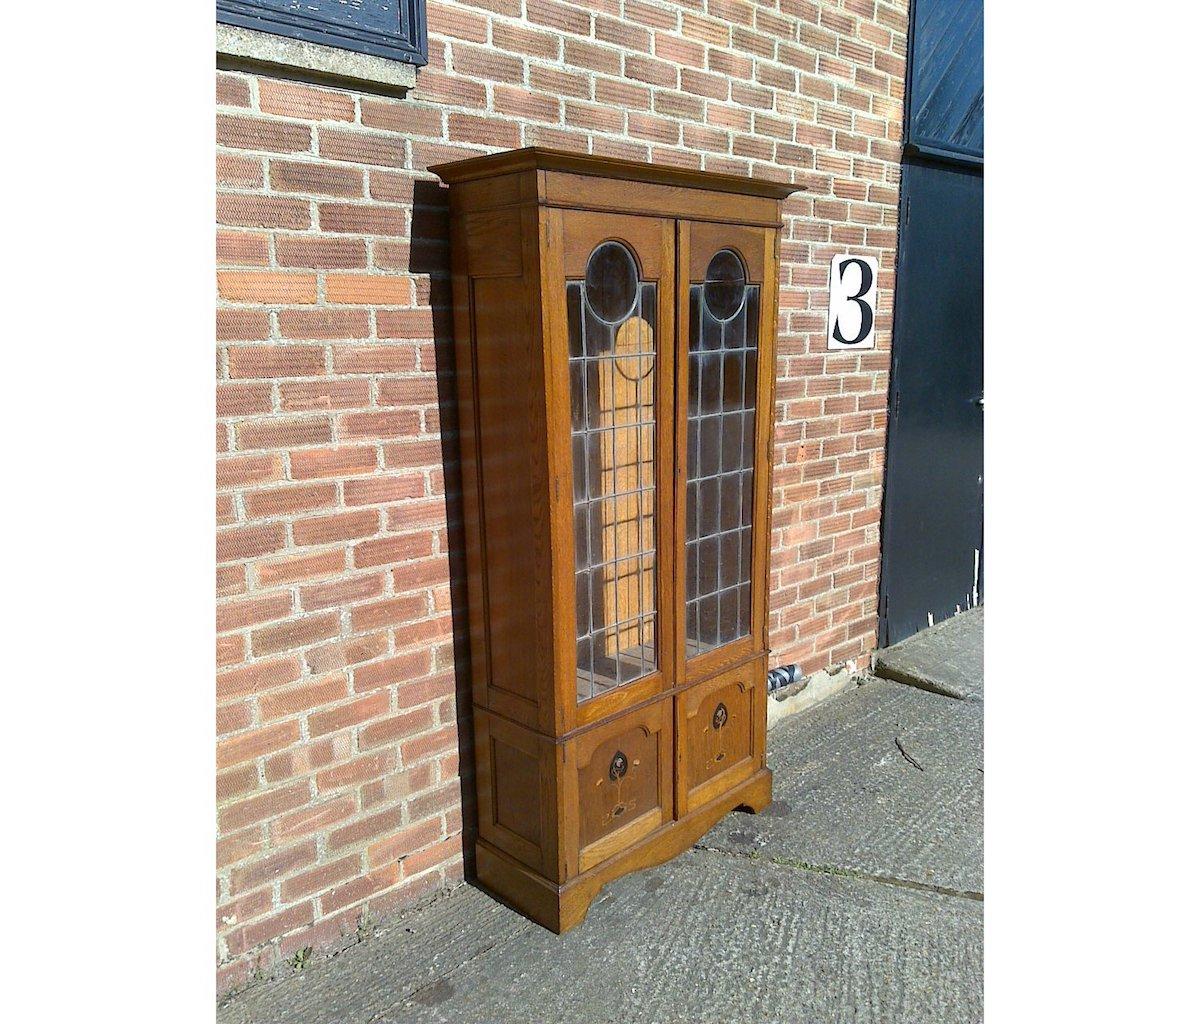 An Arts & Crafts oak bookcase with a flaring cornice, leaded glazed doors with circular details to the tops, the lower cupboard with stylized floral inlays using a combination of pewter, ebonized, and stained sycamore, the whole standing on a double